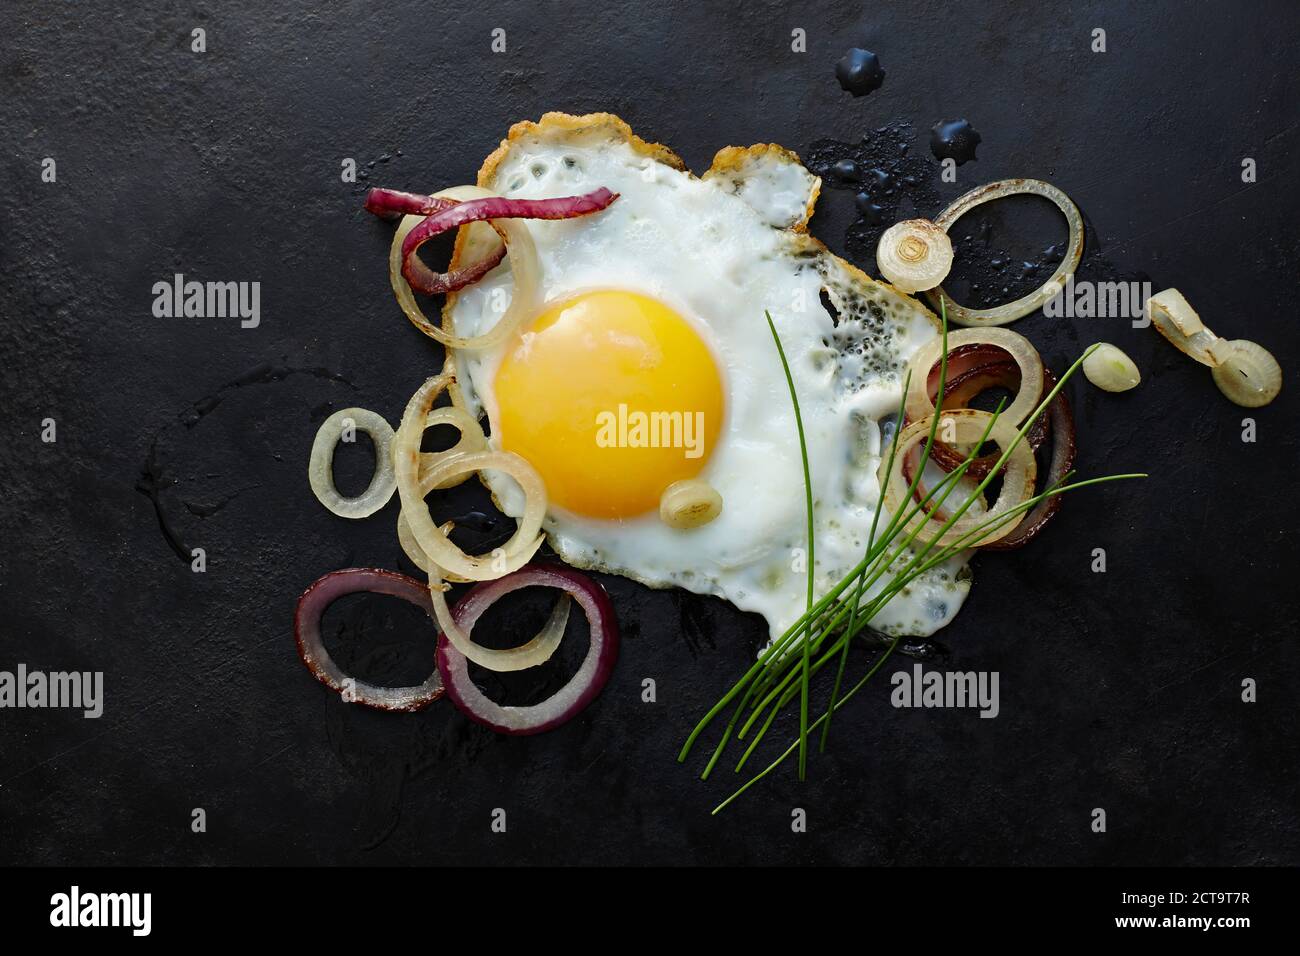 Fried egg, onions, chives Stock Photo